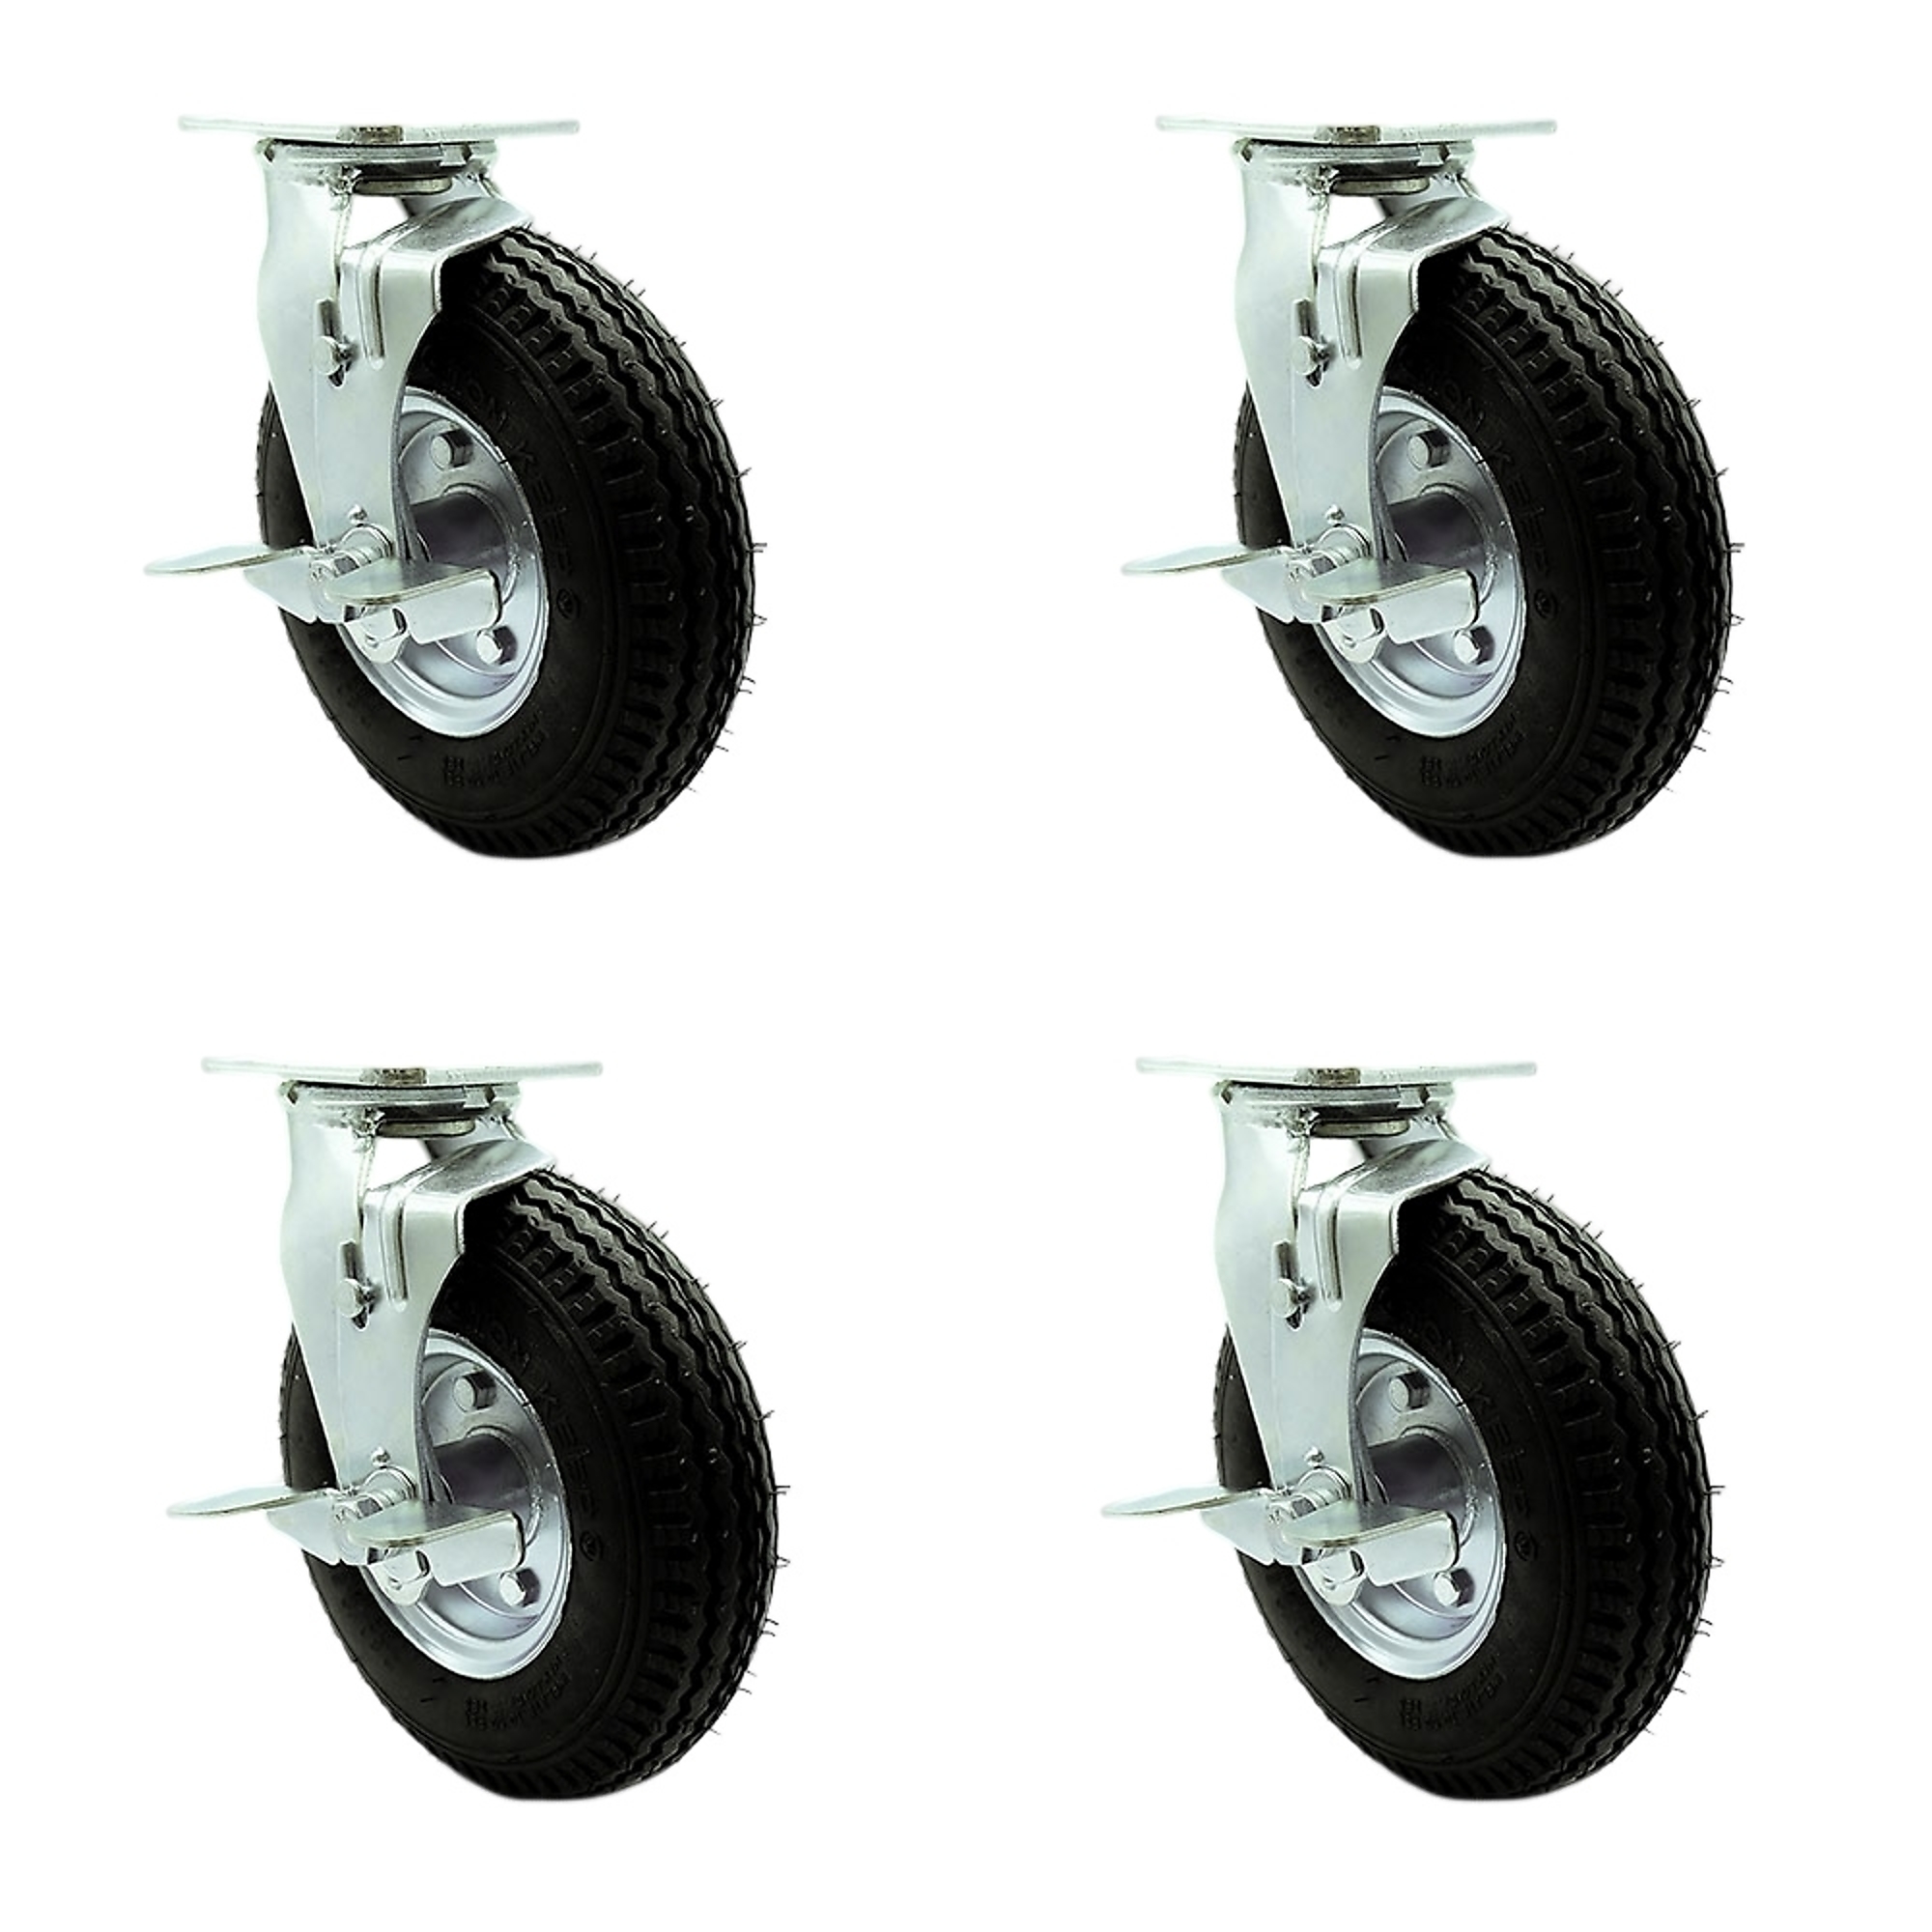 8Inch x 2 1/2Inch Plate Casters, Wheel Diameter 8 in, Caster Type Swivel, Package (qty.) 4, Model - Service Caster SCC-100S280-PNB-TLB-BSL-2-TLB-2